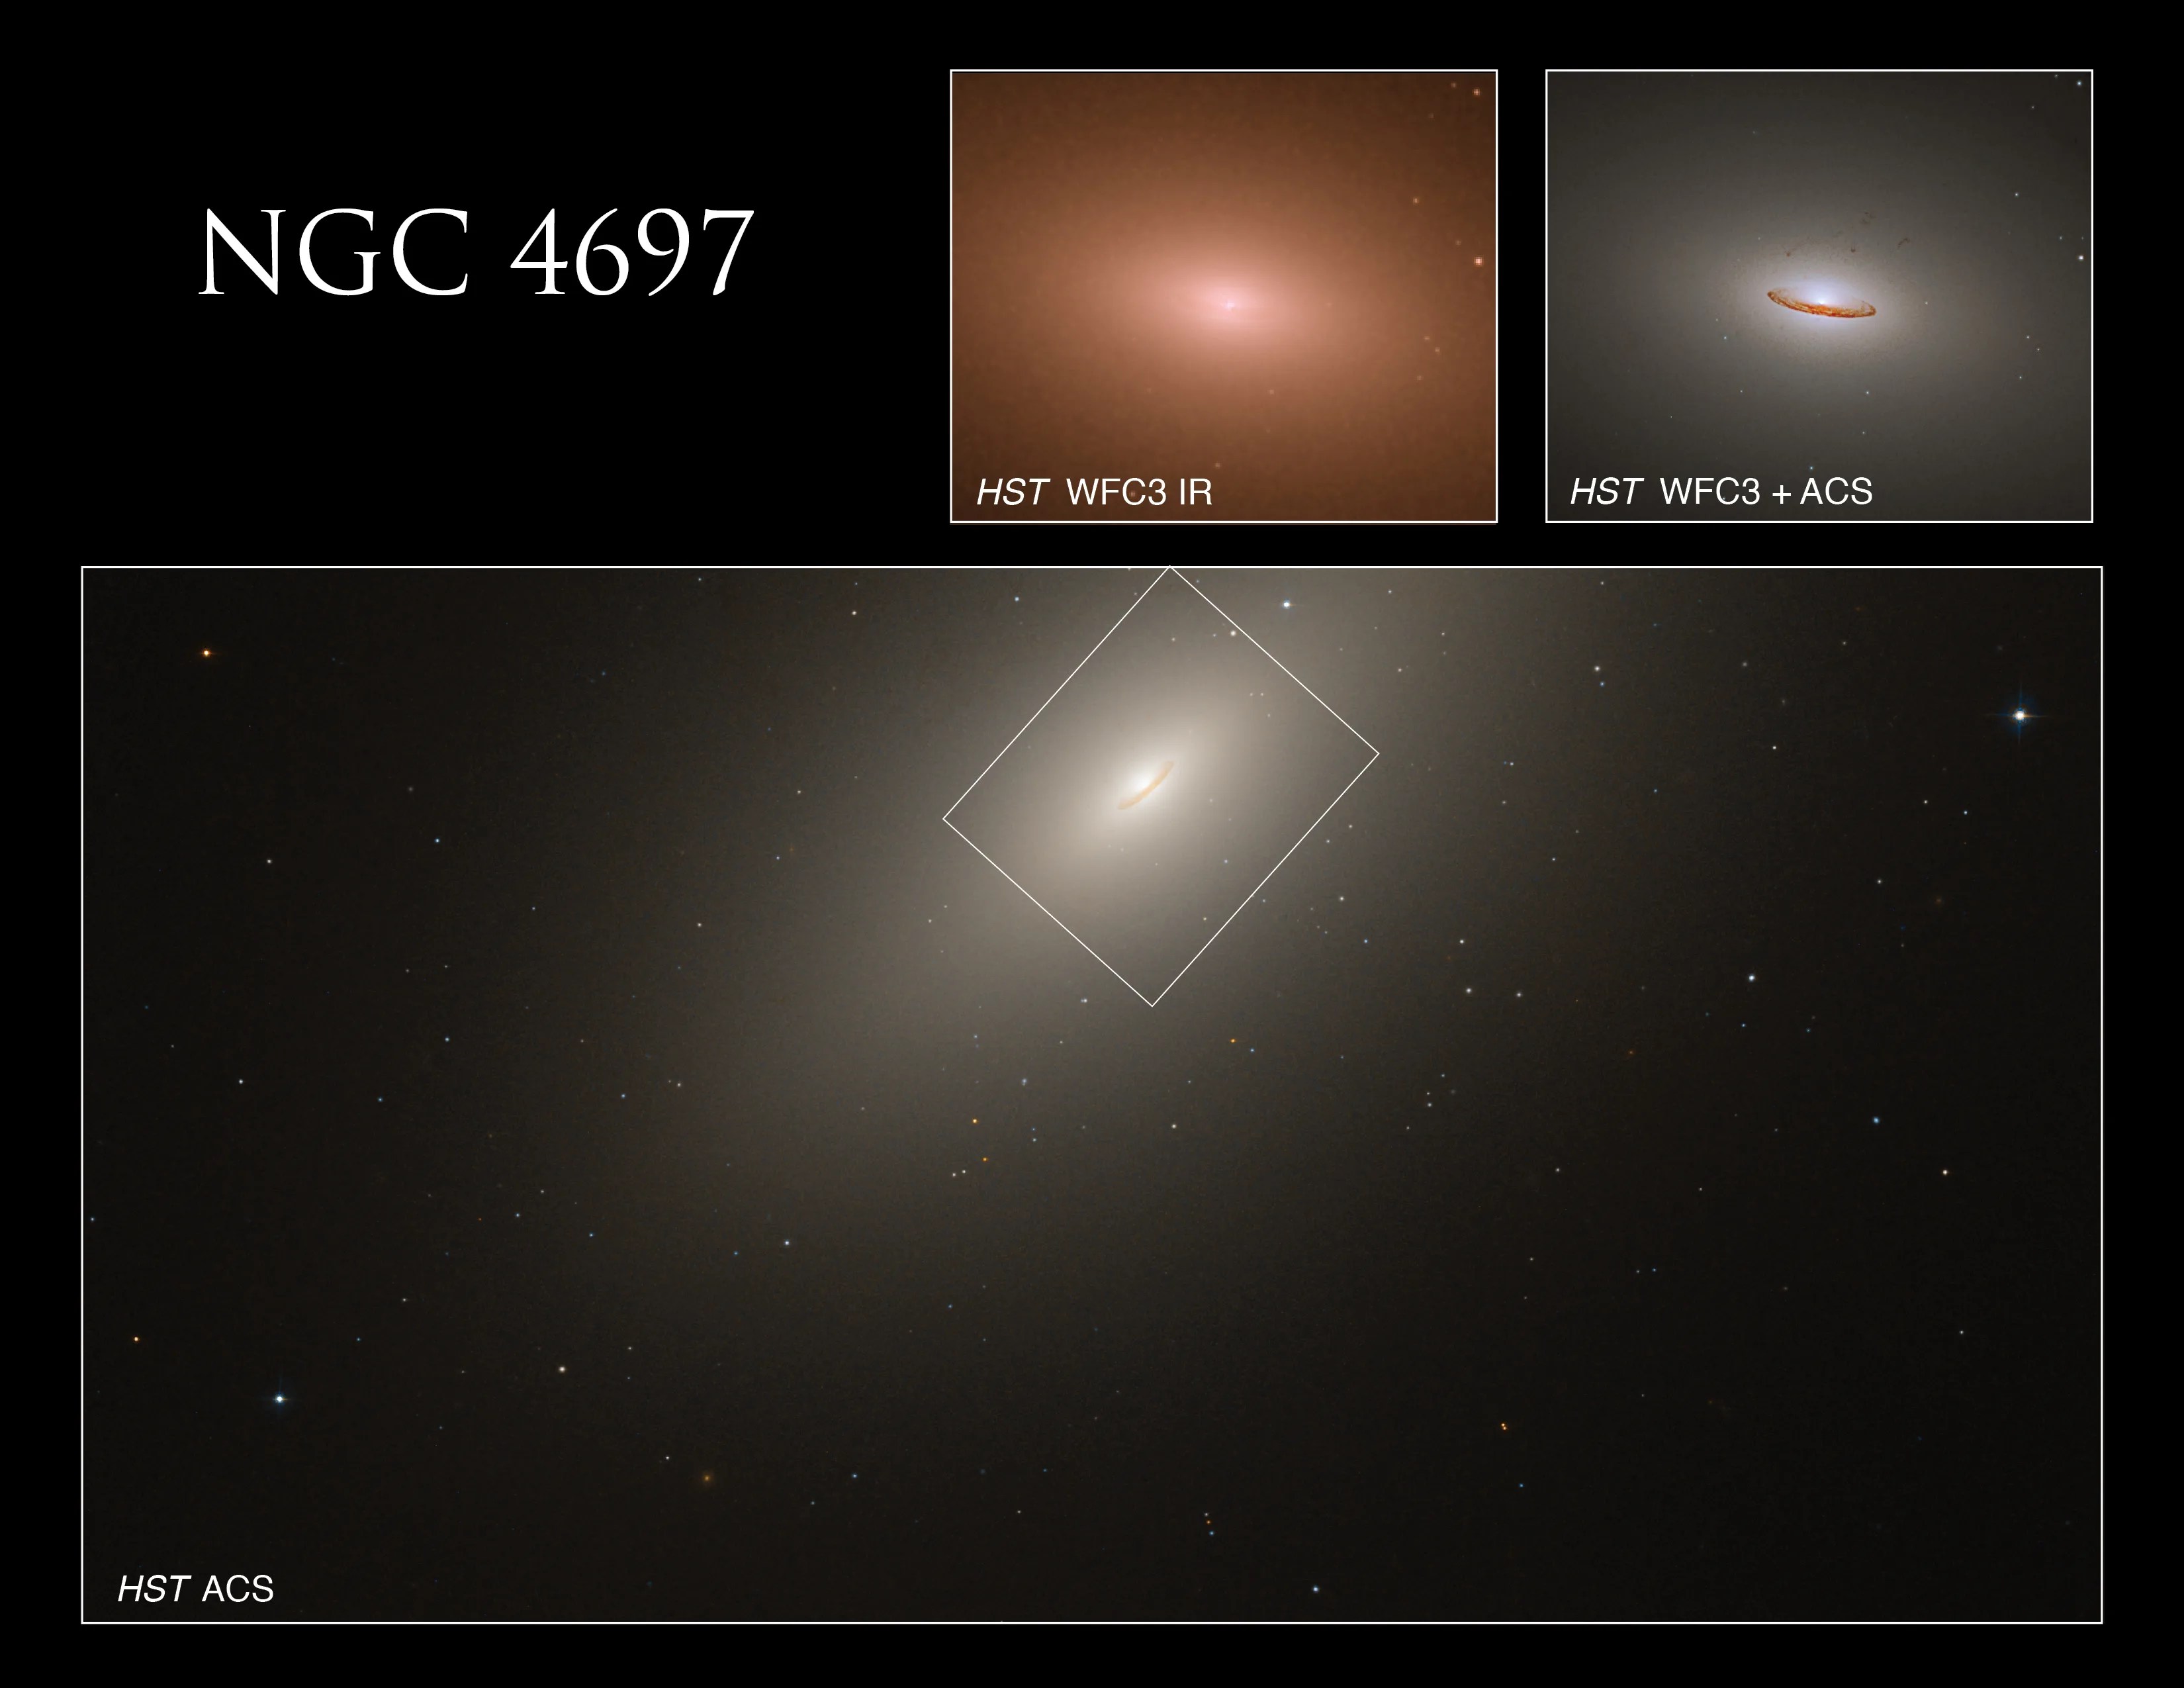 The bottom picture displays the entire galaxy, while the top right picture observes its center. The top left picture also observes the center, but in infrared light.